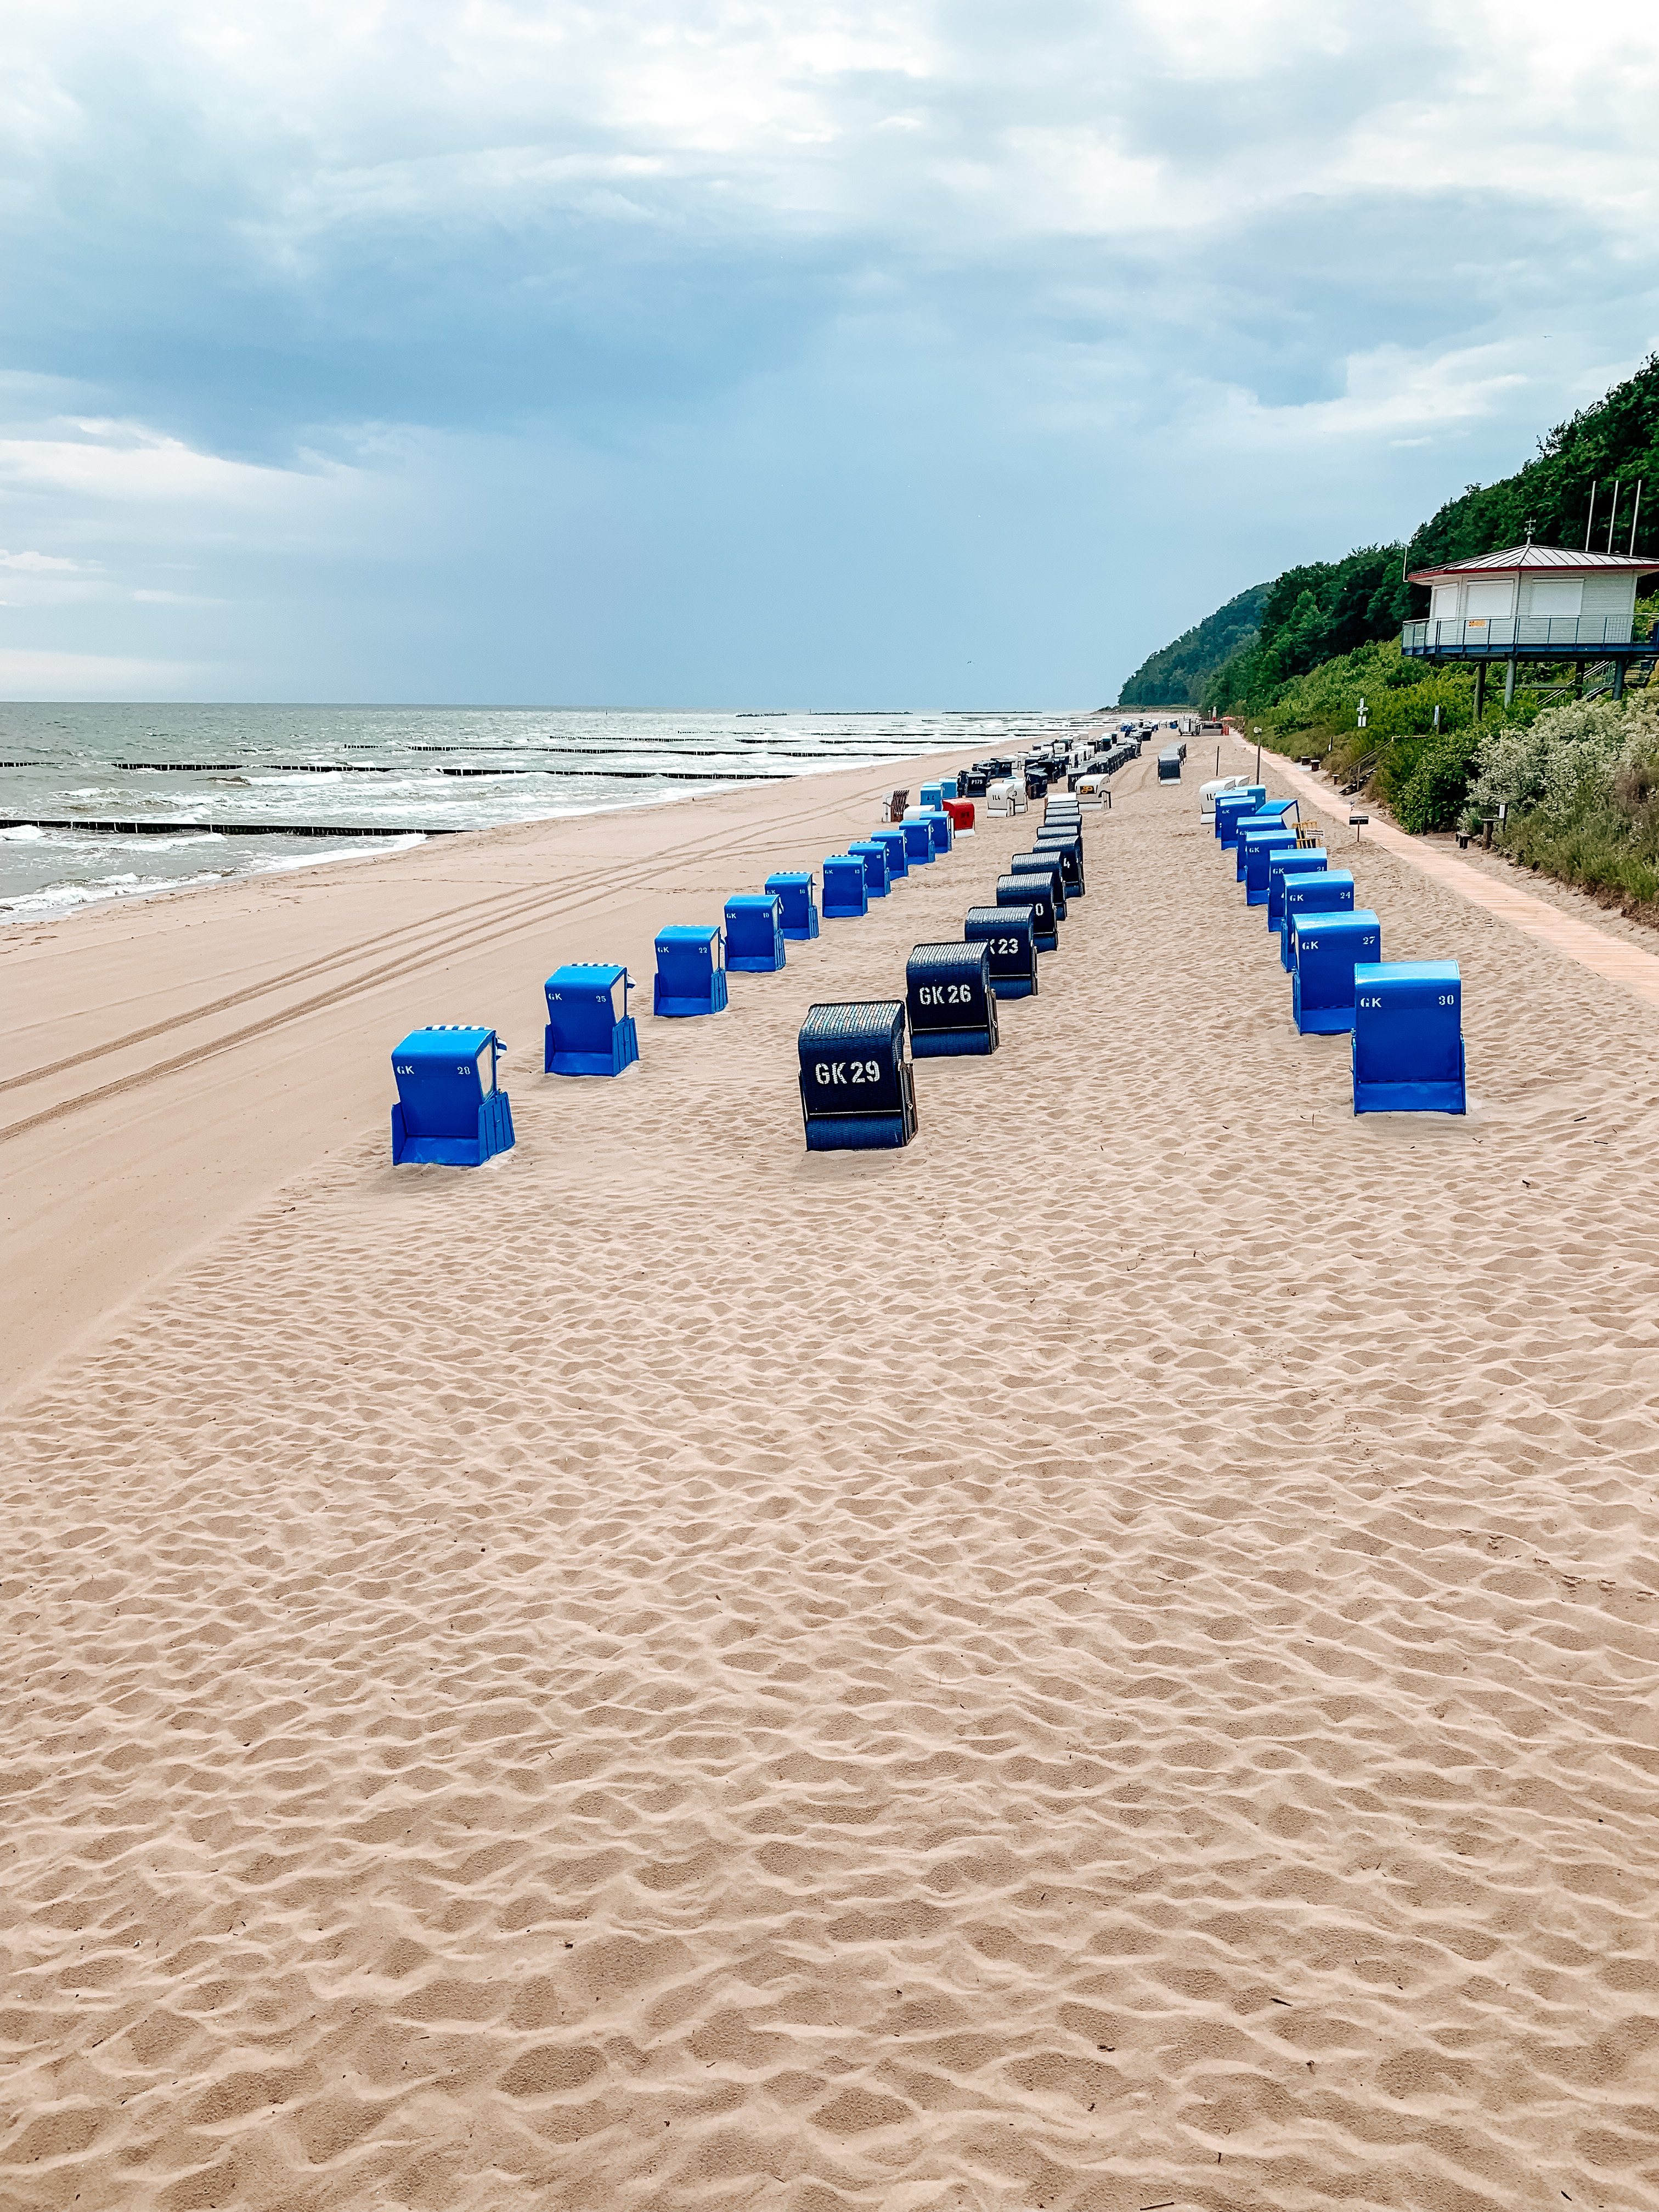 One Time for Usedom… Travel to A Insel to Girl American German Sommerzeit: Germans –